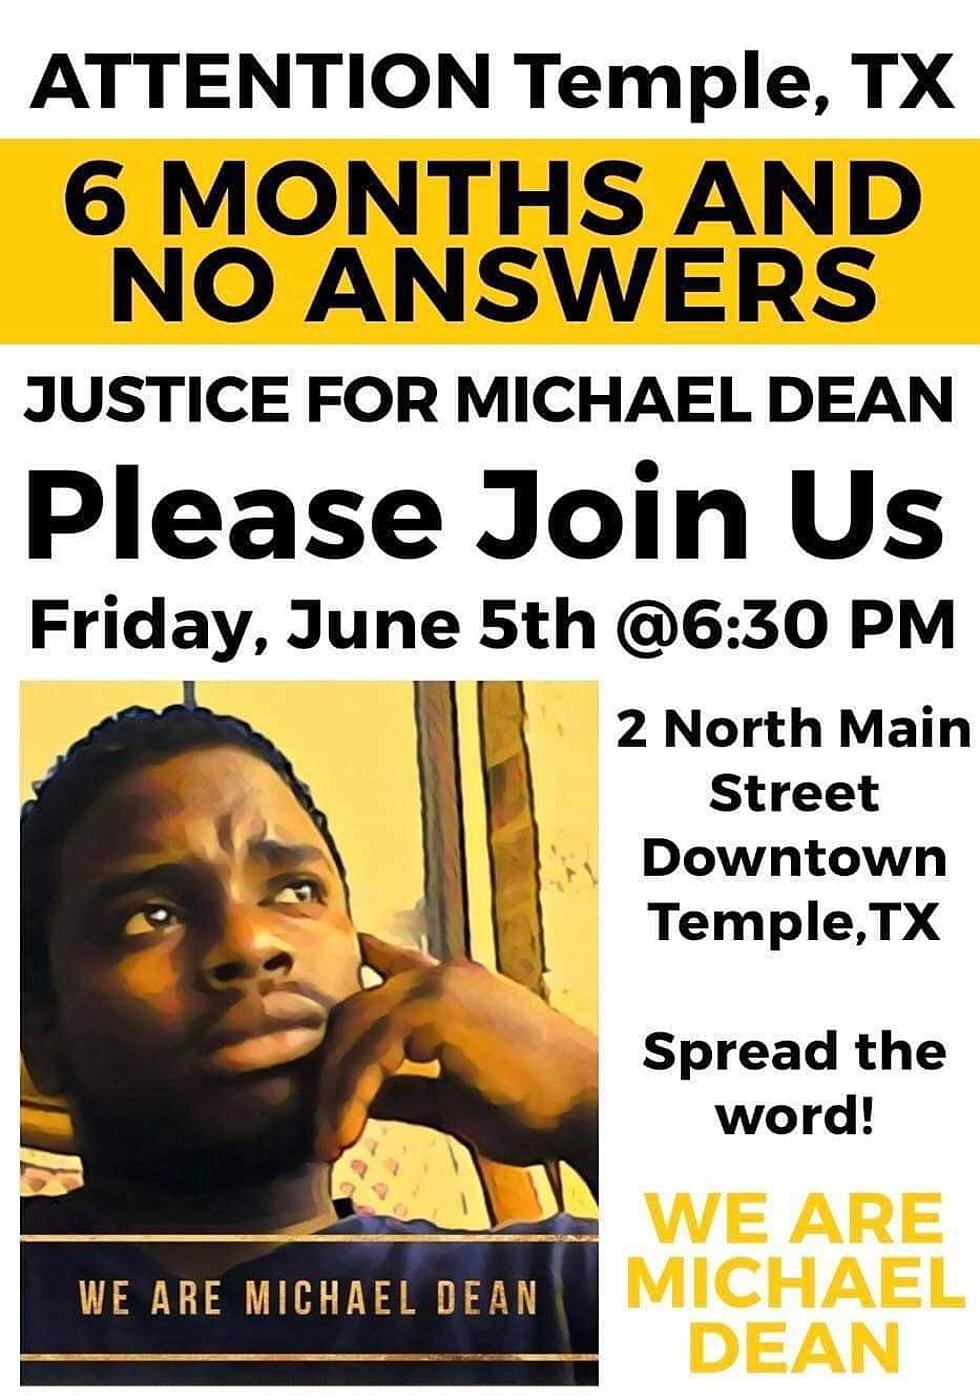 Temple March For Michael Dean Planned For Friday